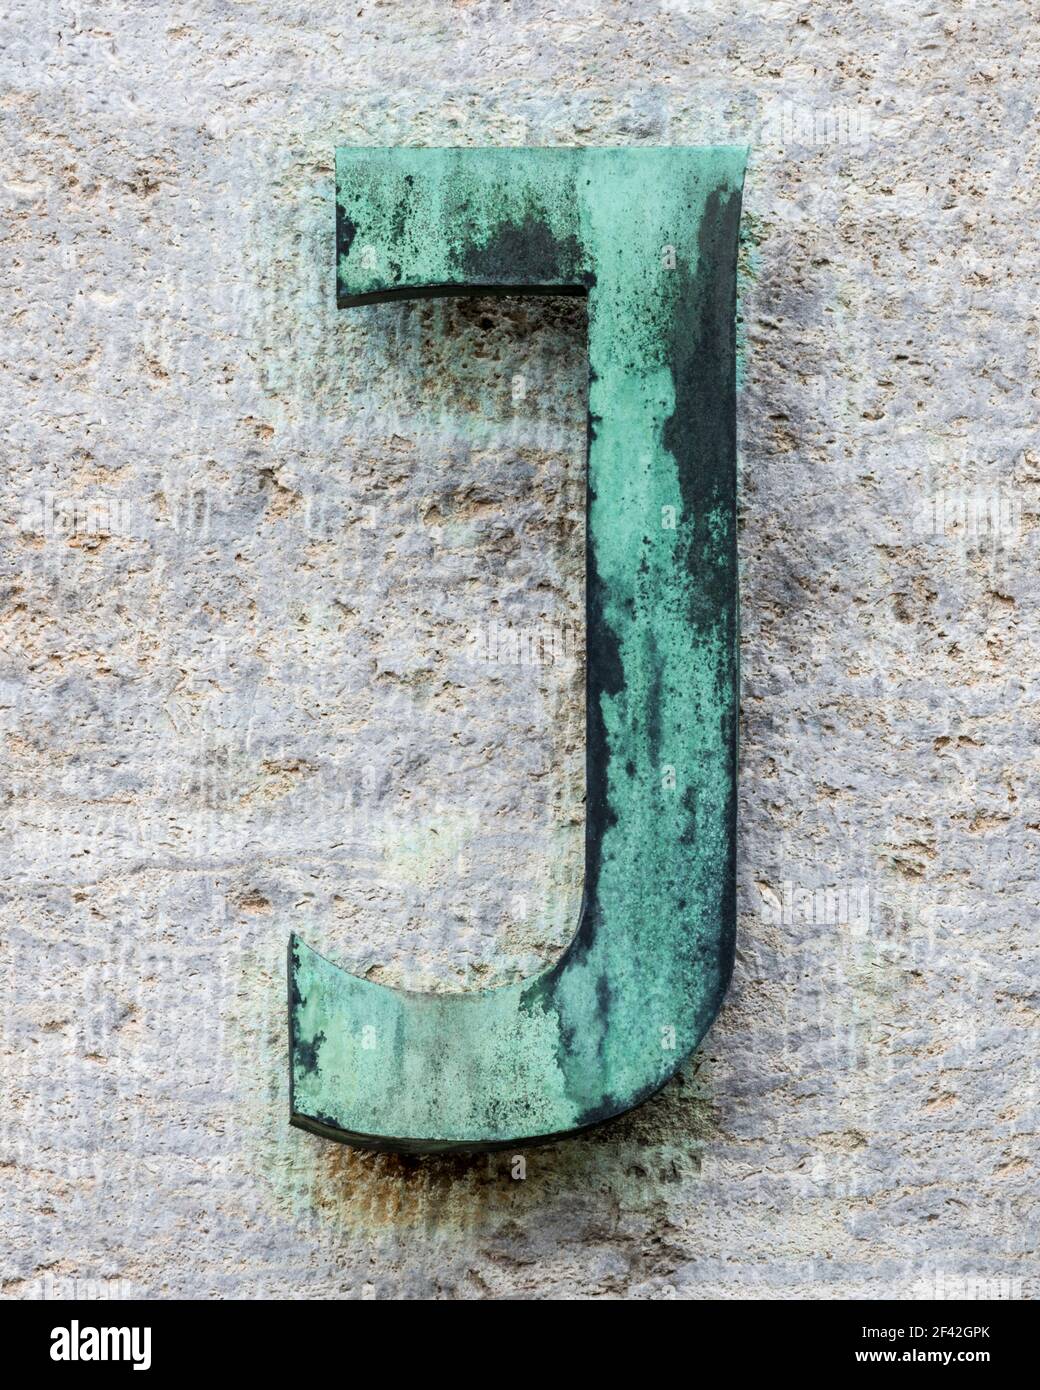 Metal letter J covered with verdigris on a natural stone wall Stock Photo